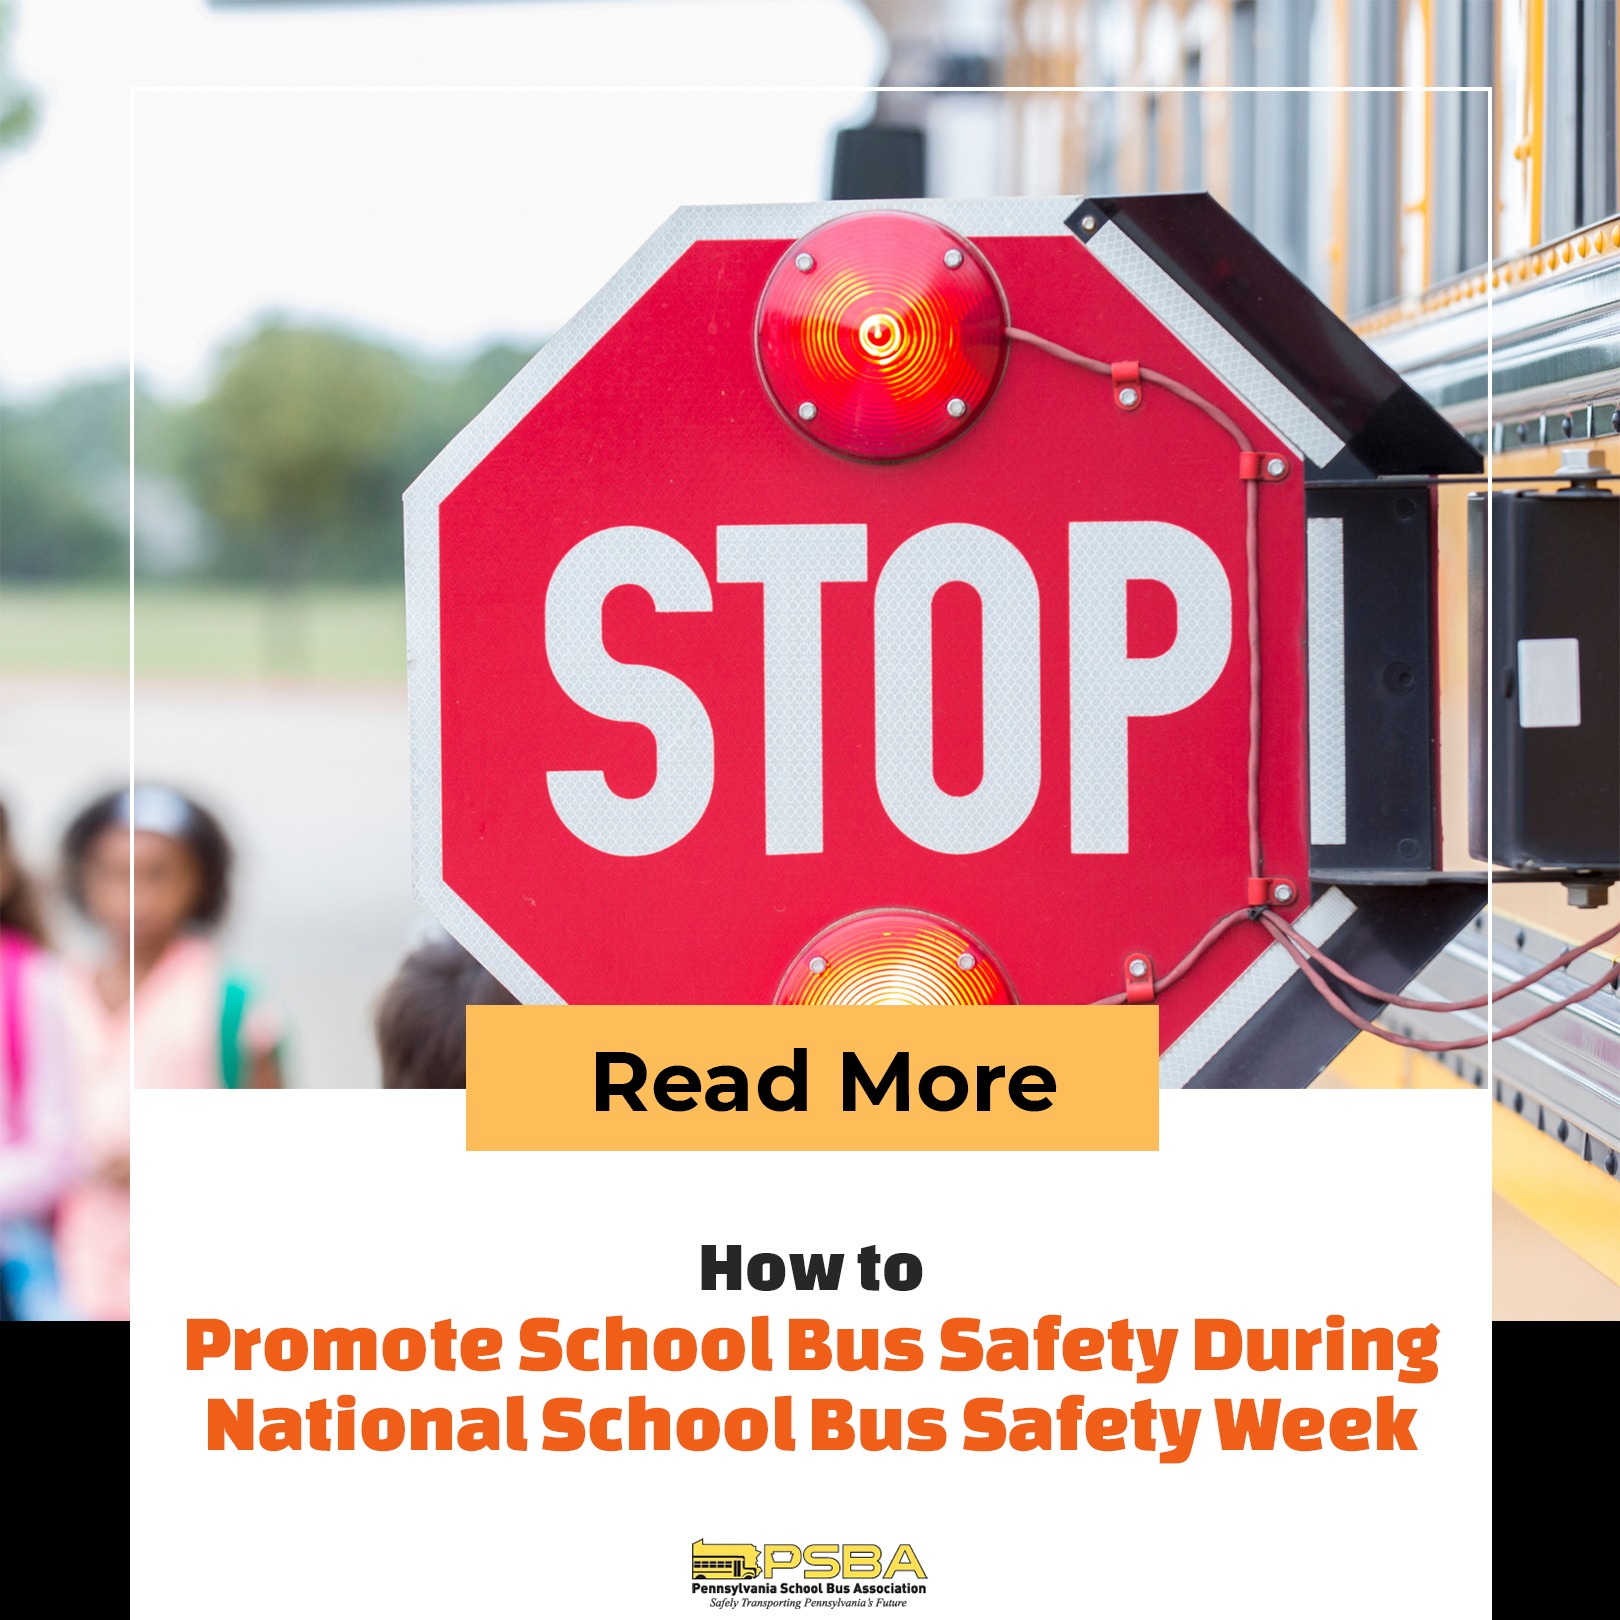 How to Promote School Bus Safety During National School Bus Safety Week